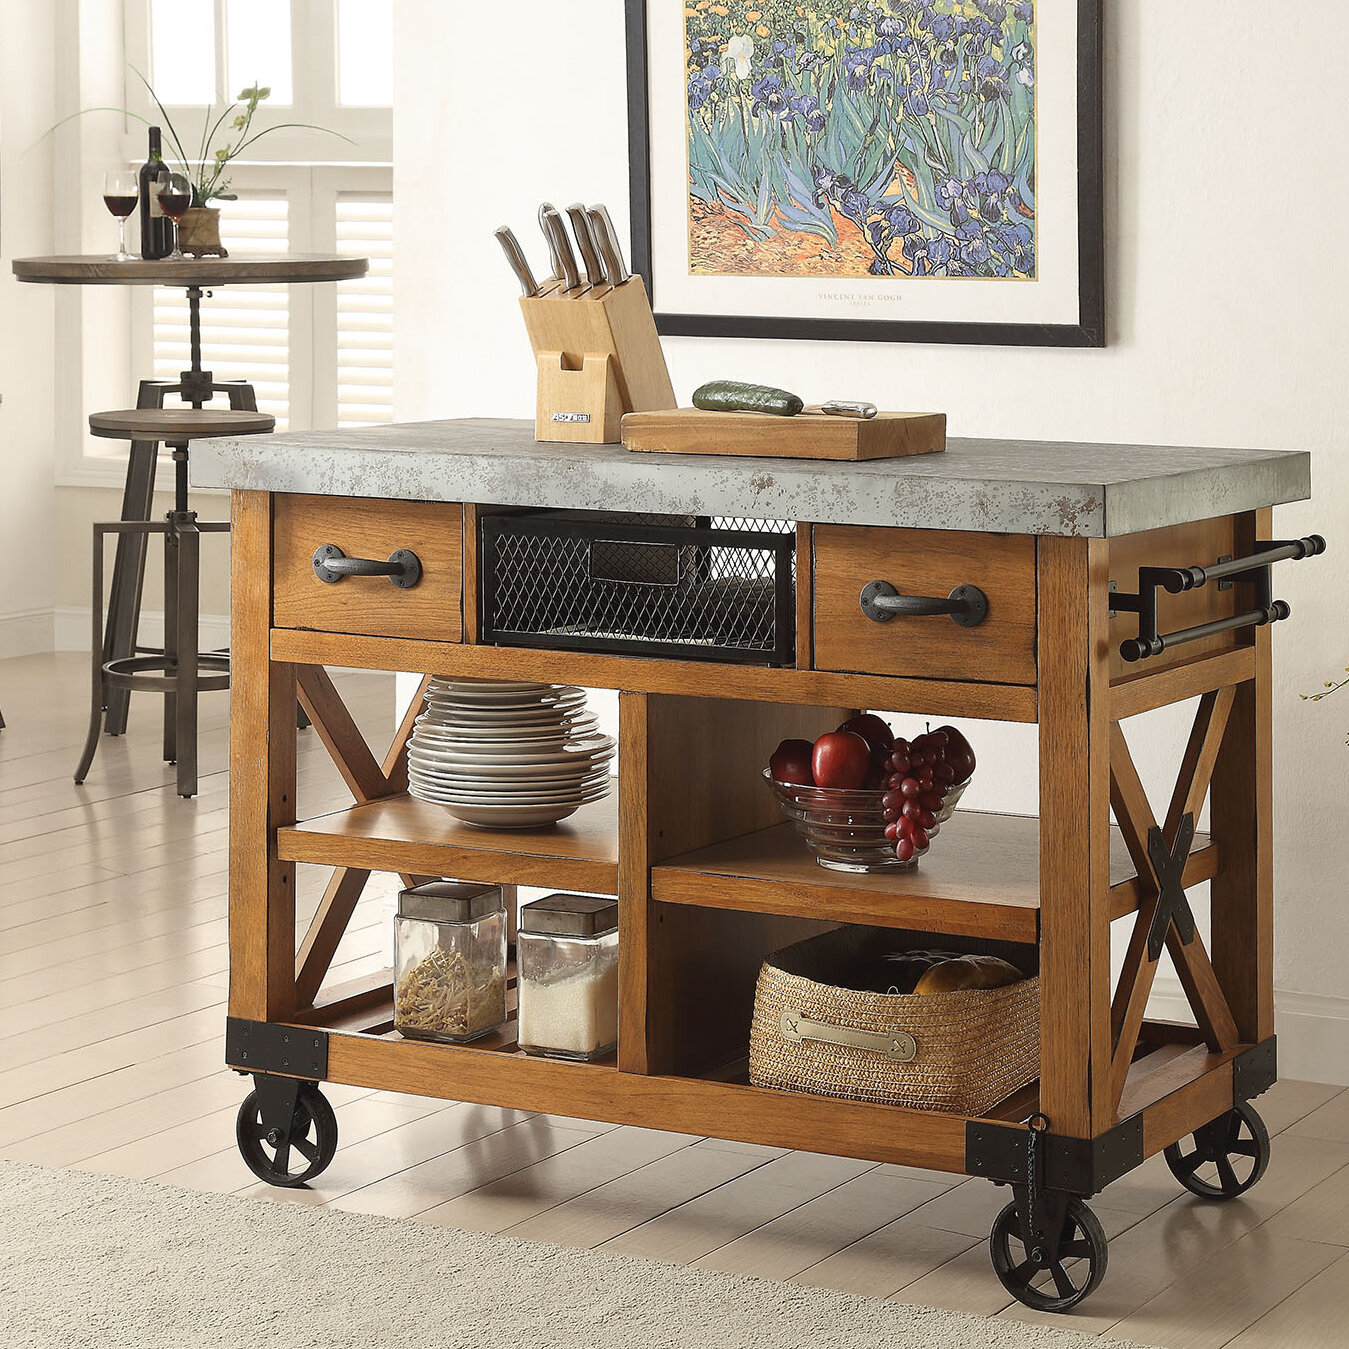 Rustic Kitchen Islands Carts FREE Shipping Over 35 Wayfair